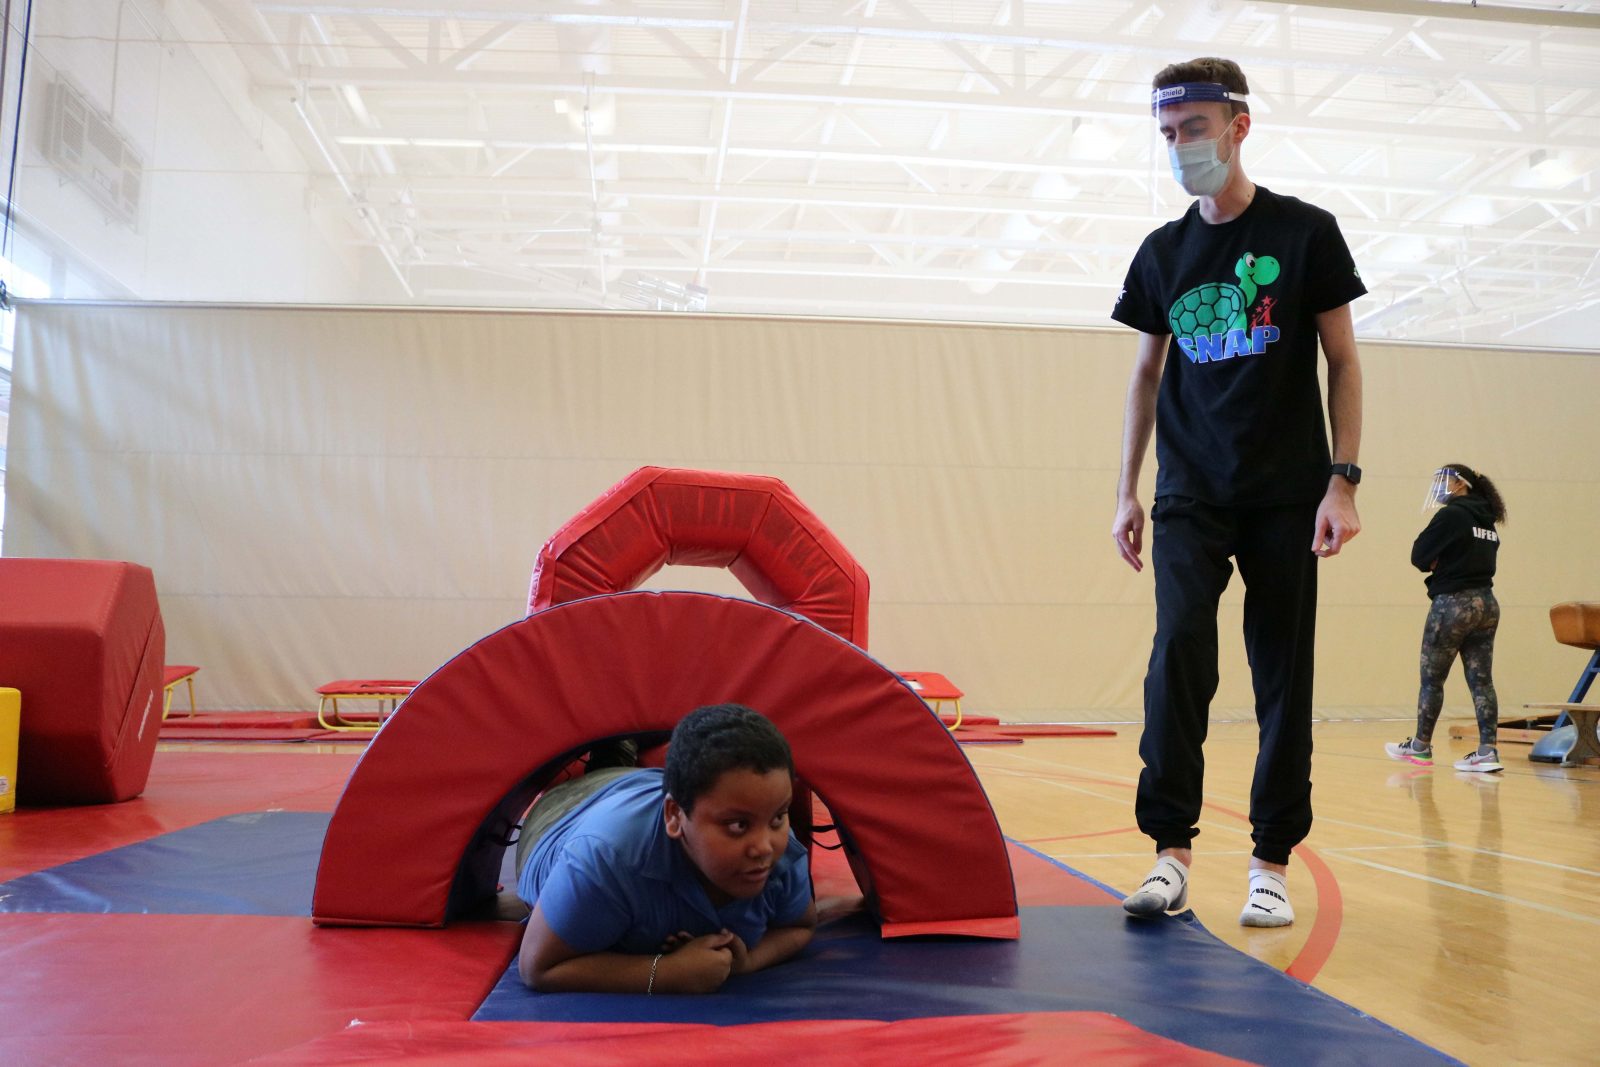 A child climbs through a padded archway under the supervision of a masked program co-ordinator in a gymnasium.